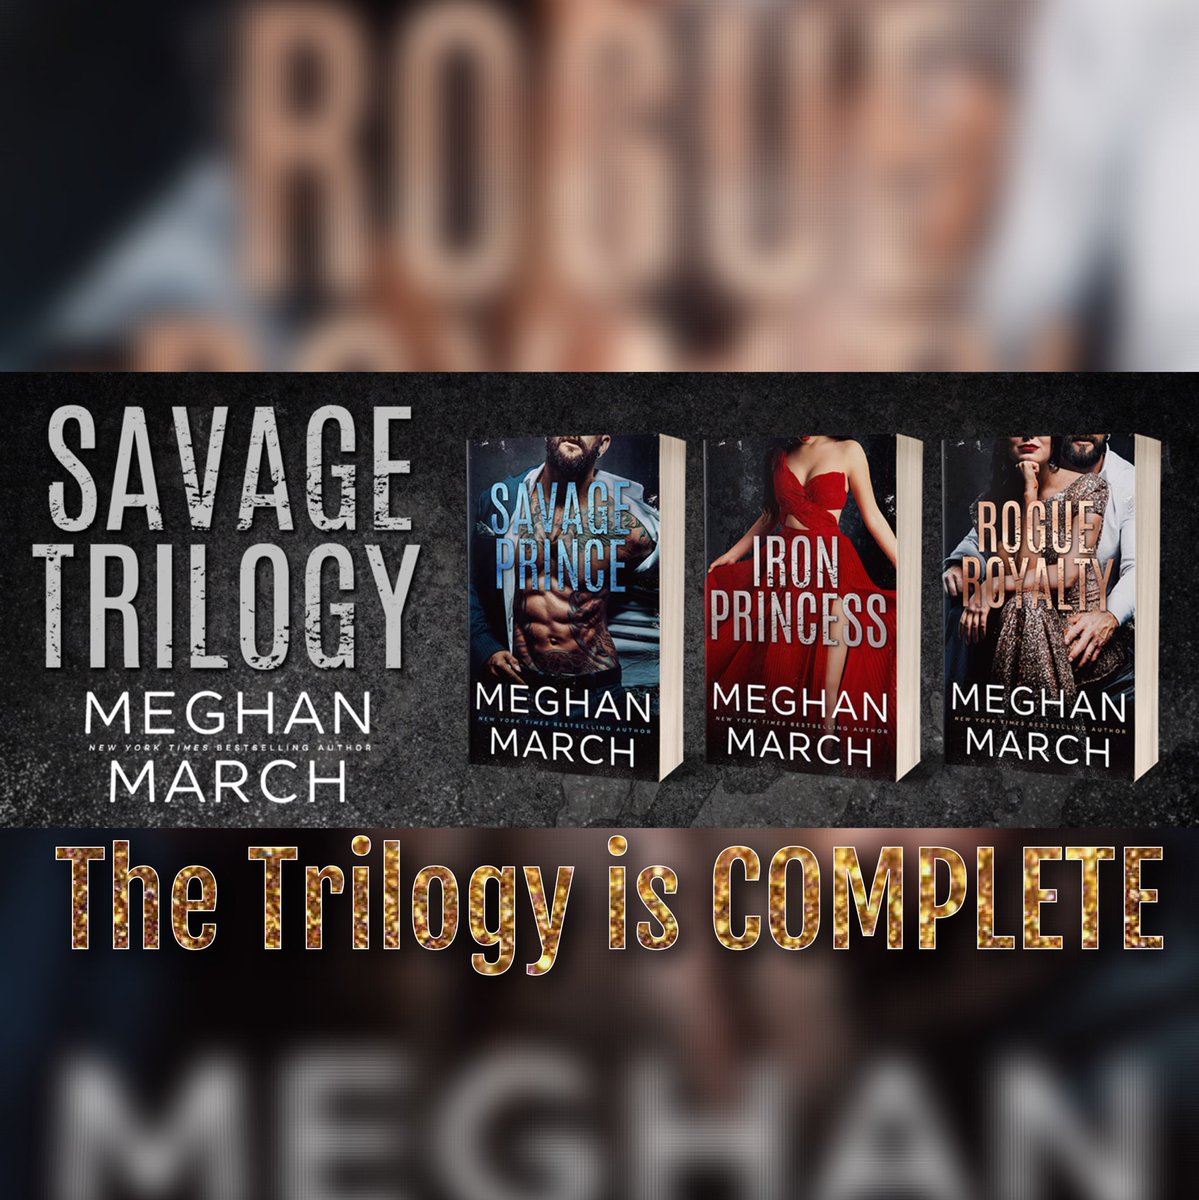 #NewRelease
I have been waiting for this release. Now I can read the complete trilogy back to back. I’m so freaking EXCITED!!!!!!! amzn.to/2IF2Rtj
#SavageTrilogy #AntiHeroRomance #BigBadSexyAlphas #MeghanMarchBooks